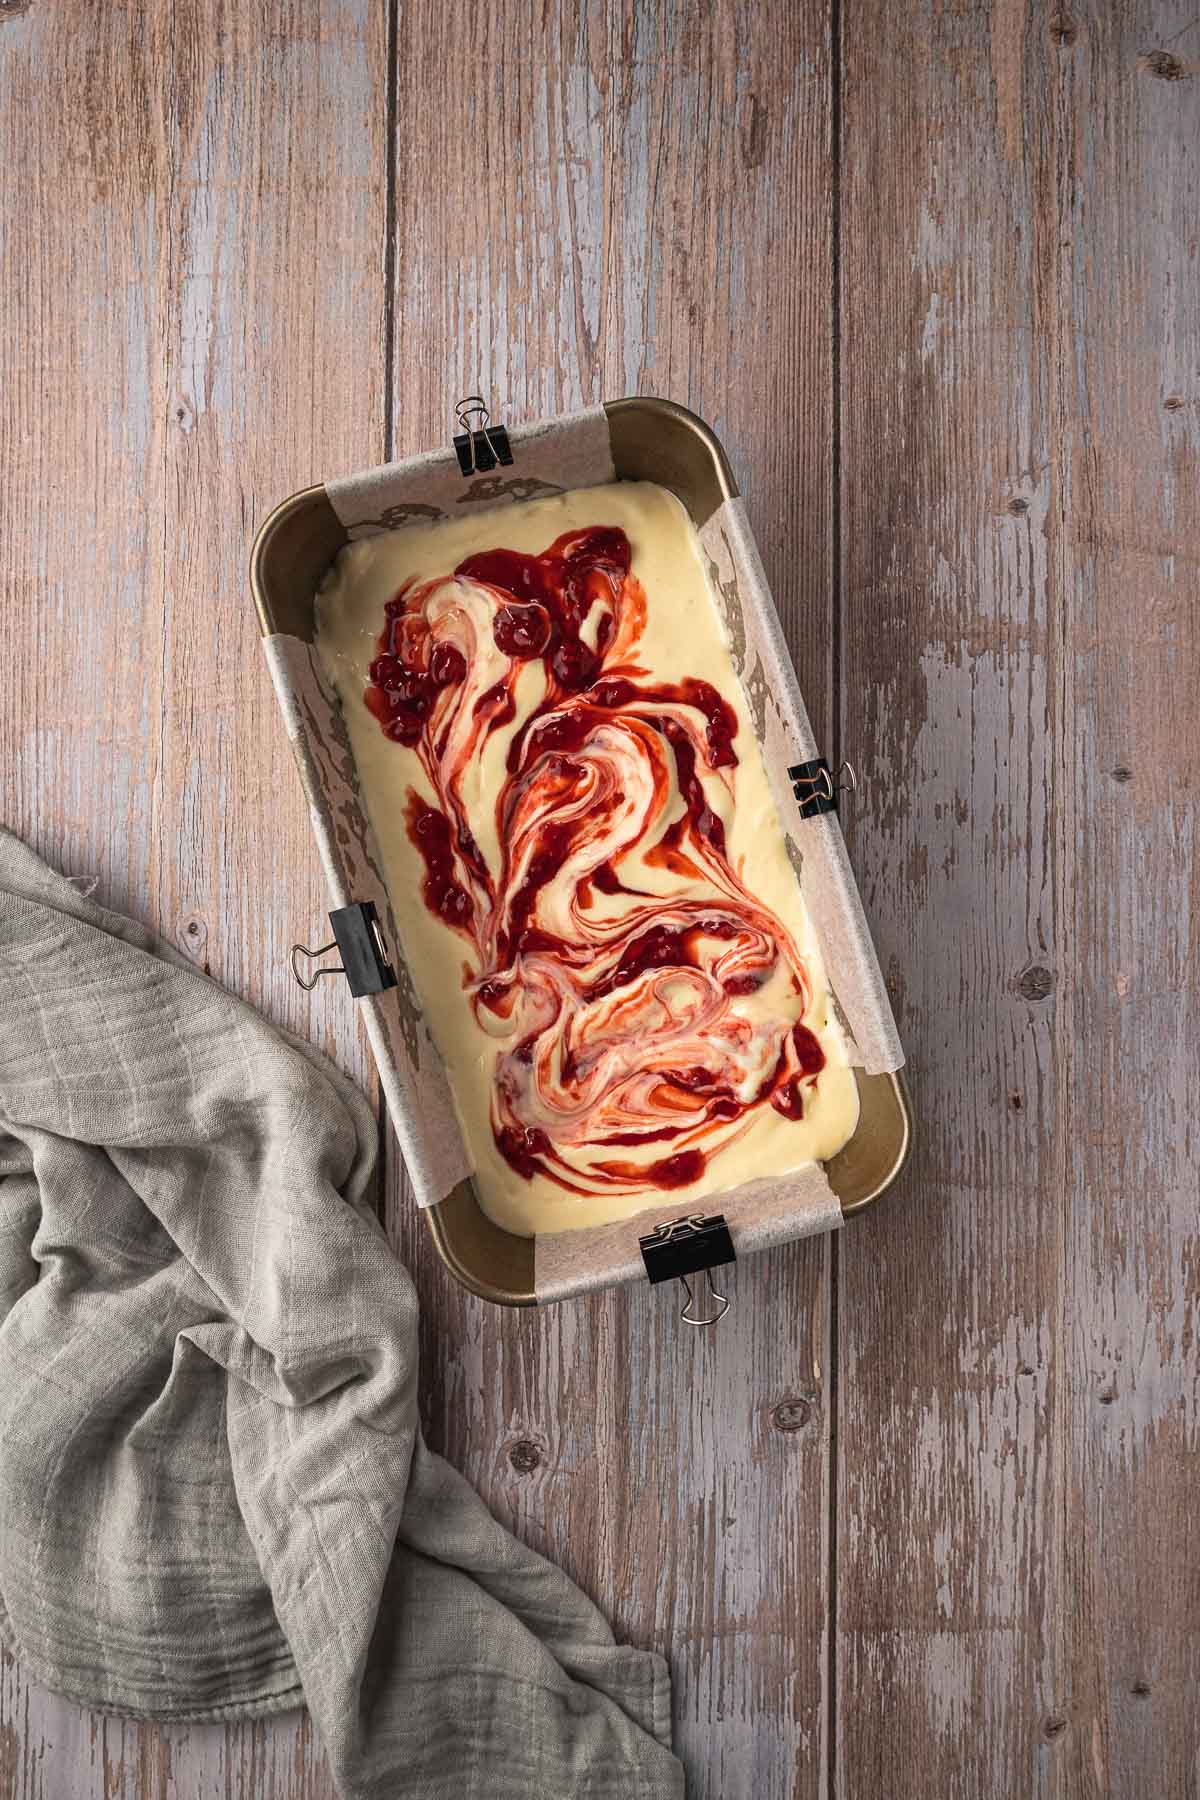 Strawberry compote swirled into the cheesecake filling